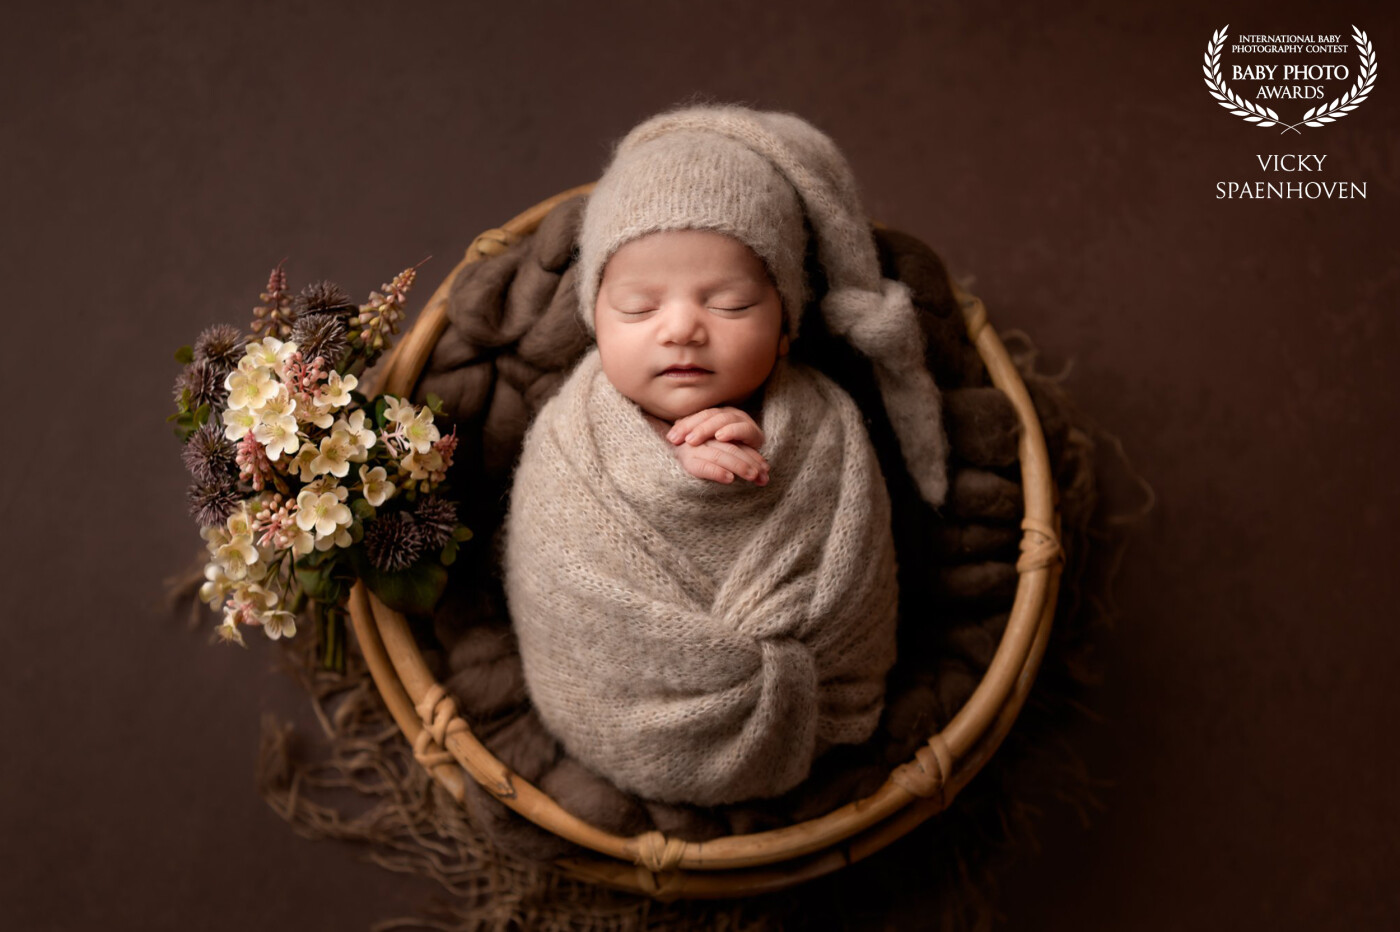 A warm and tender image of babygirl Aadika. I think those brown color tones look so good on her. The flowers are a lovely detail.